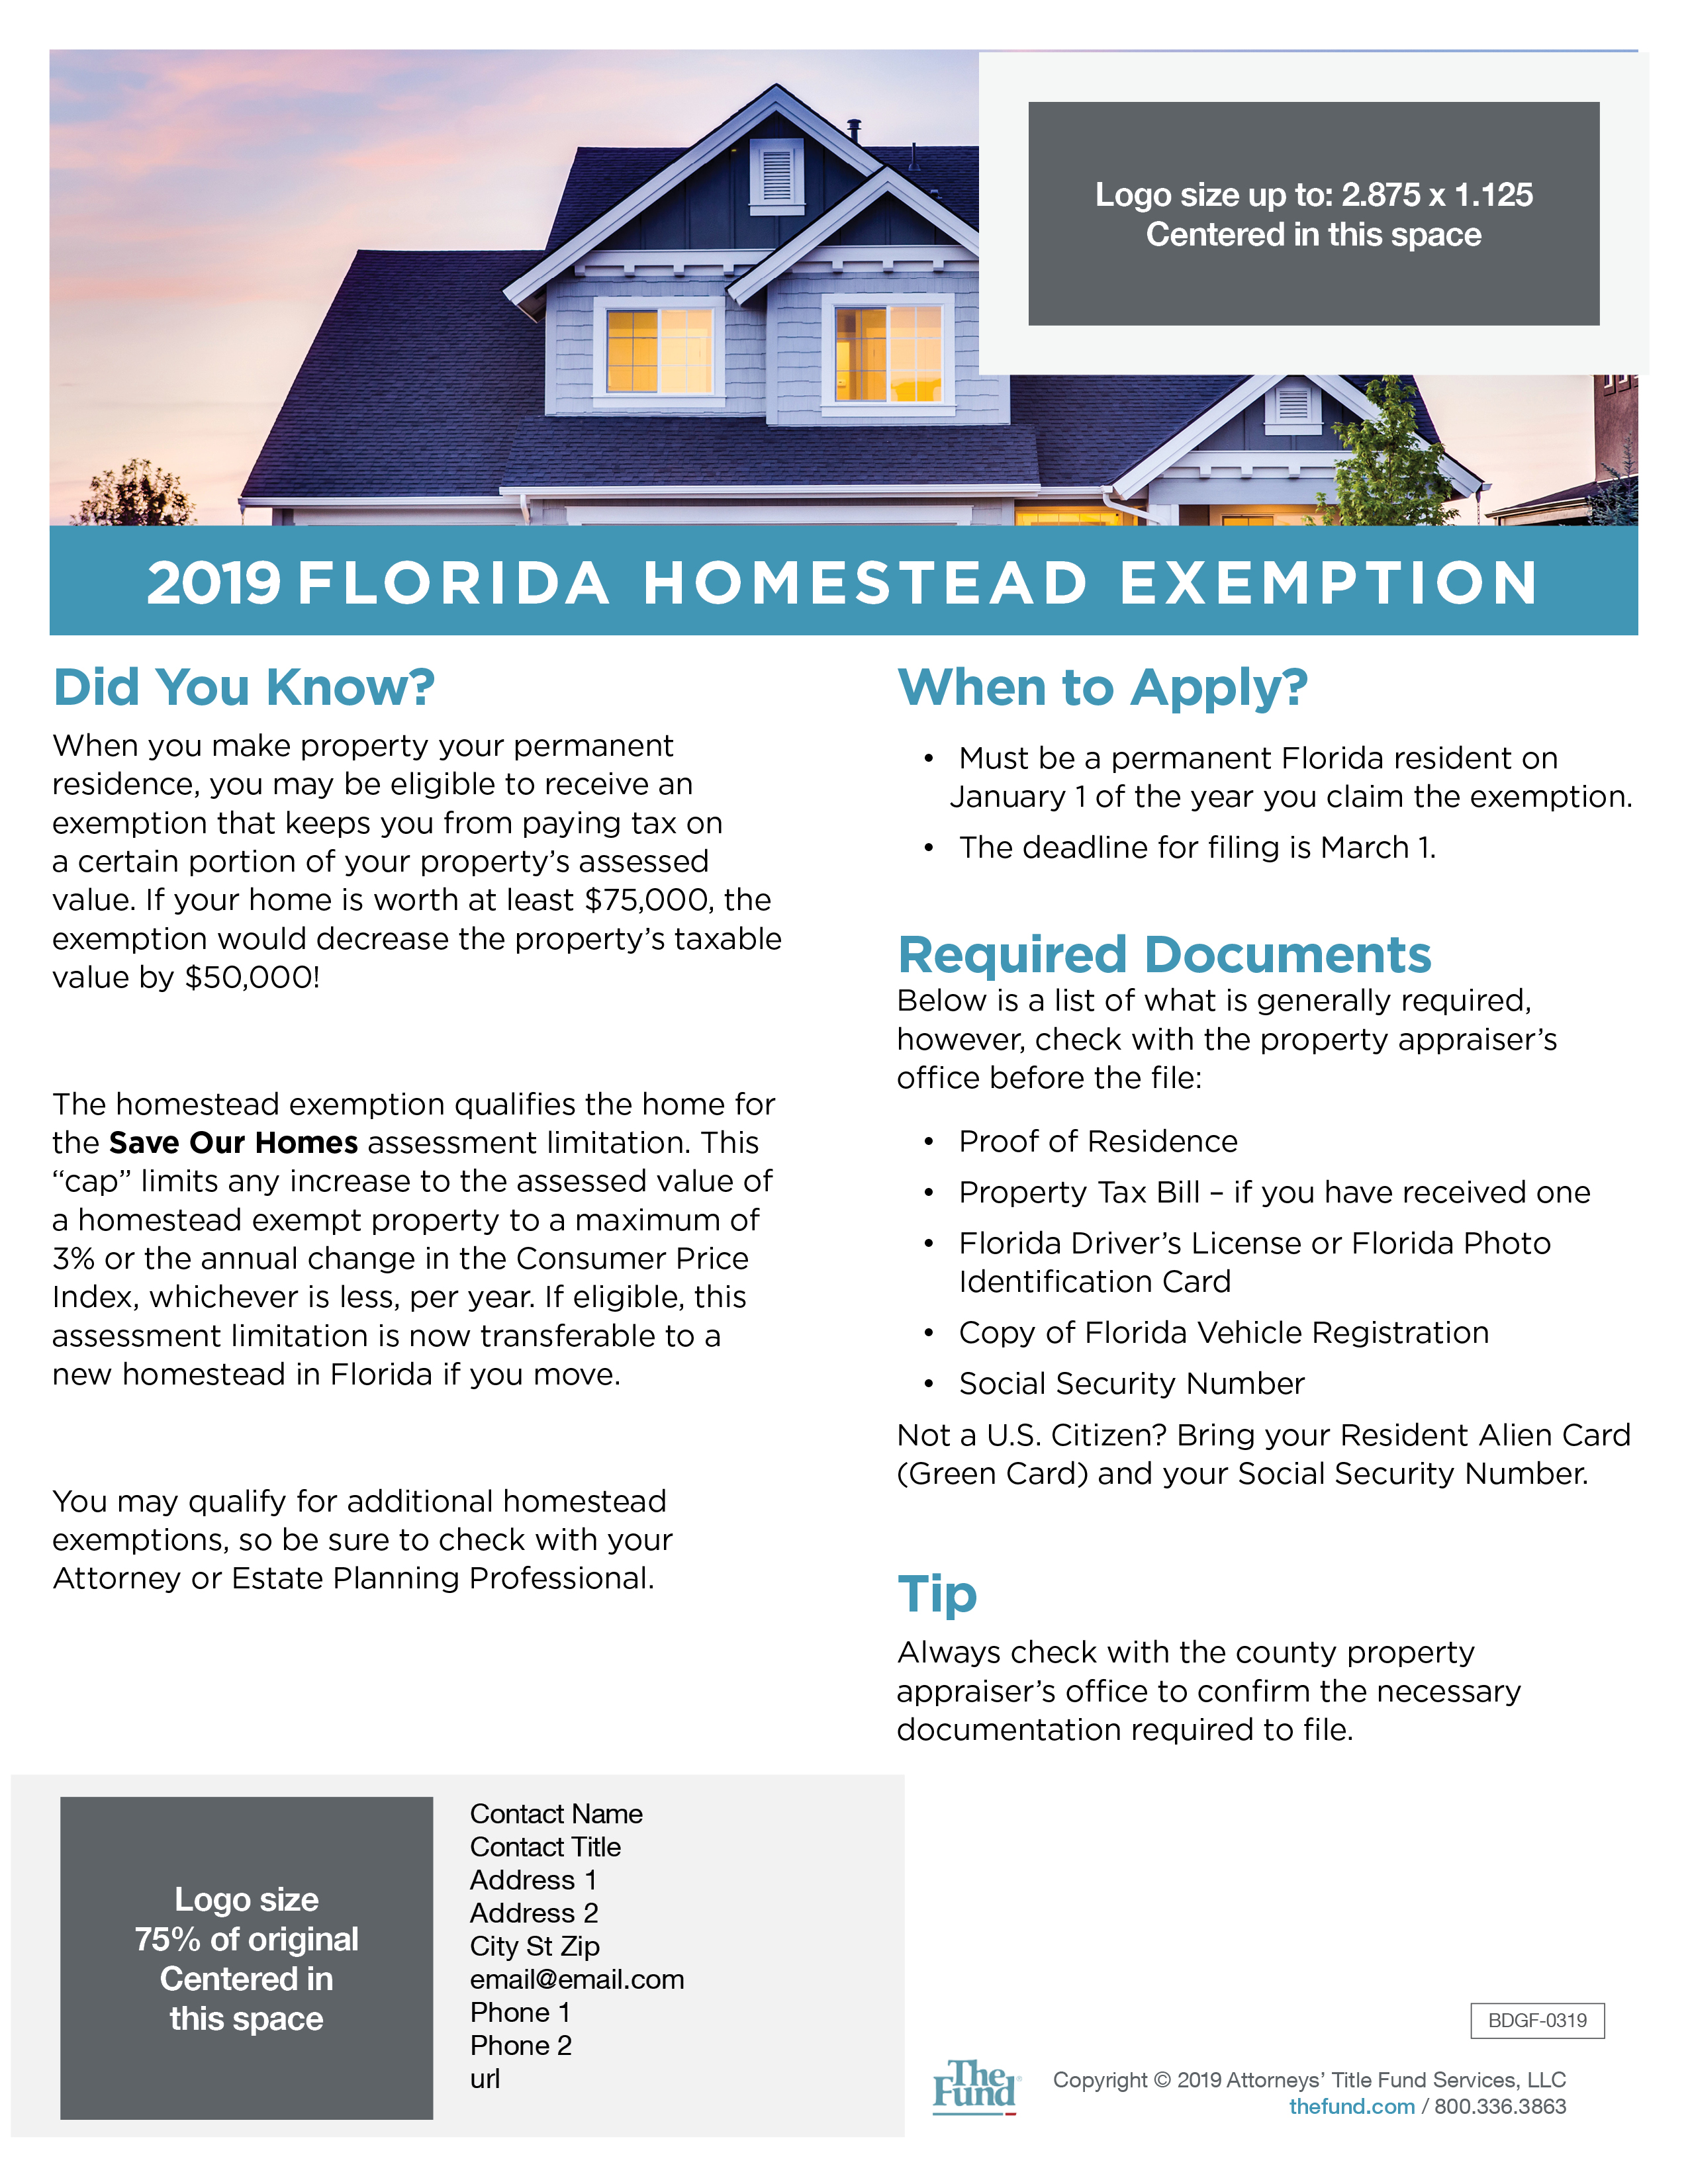 how-to-file-for-florida-homestead-exemption-waypointe-realty-youtube